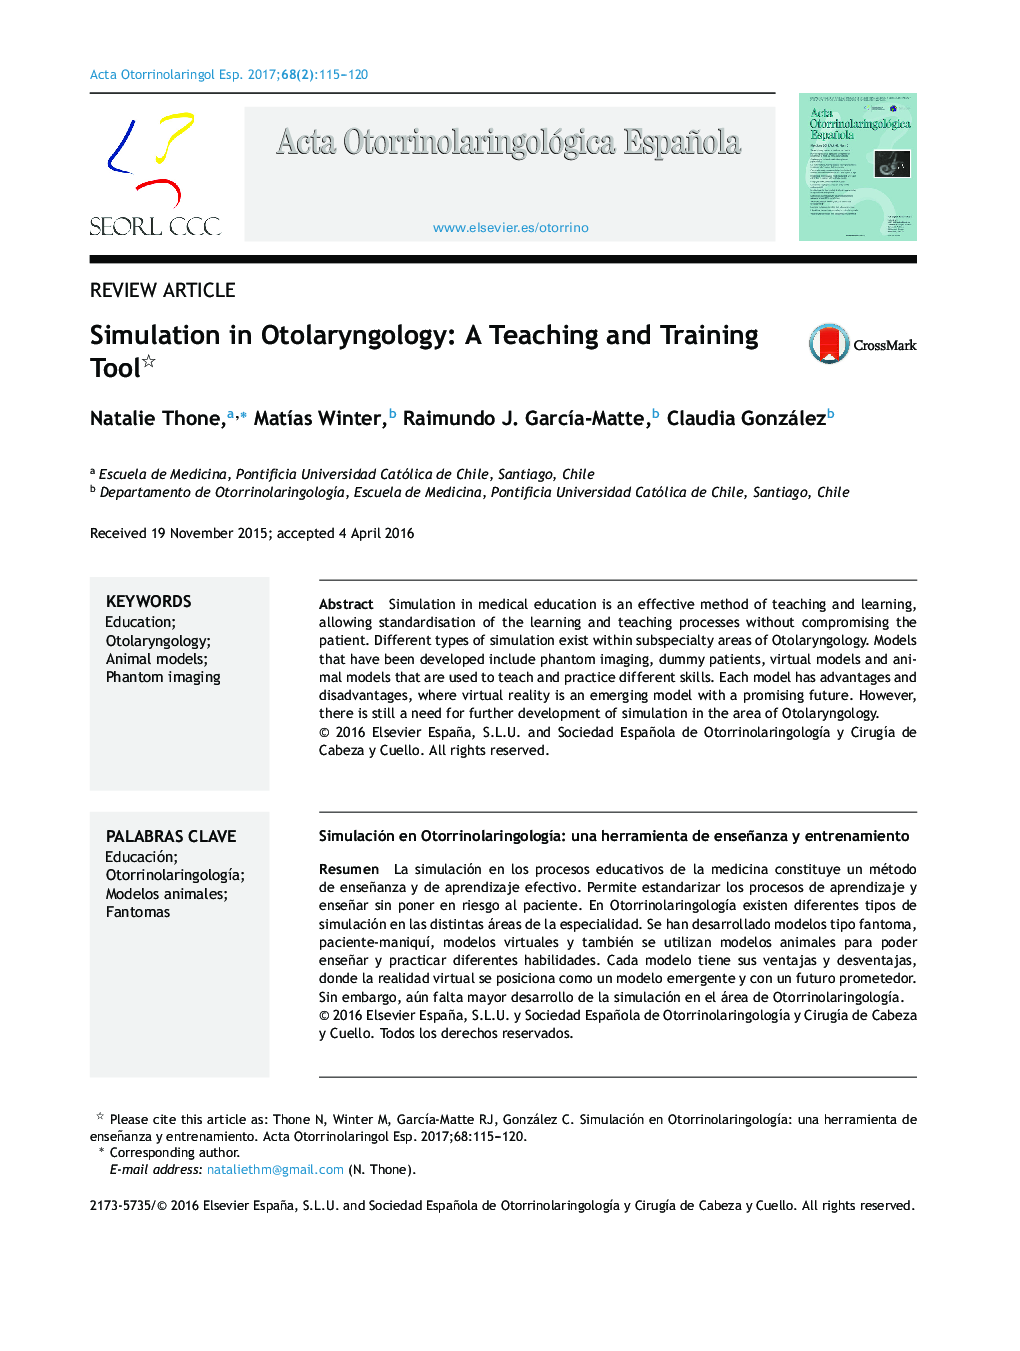 Simulation in Otolaryngology: A Teaching and Training Tool